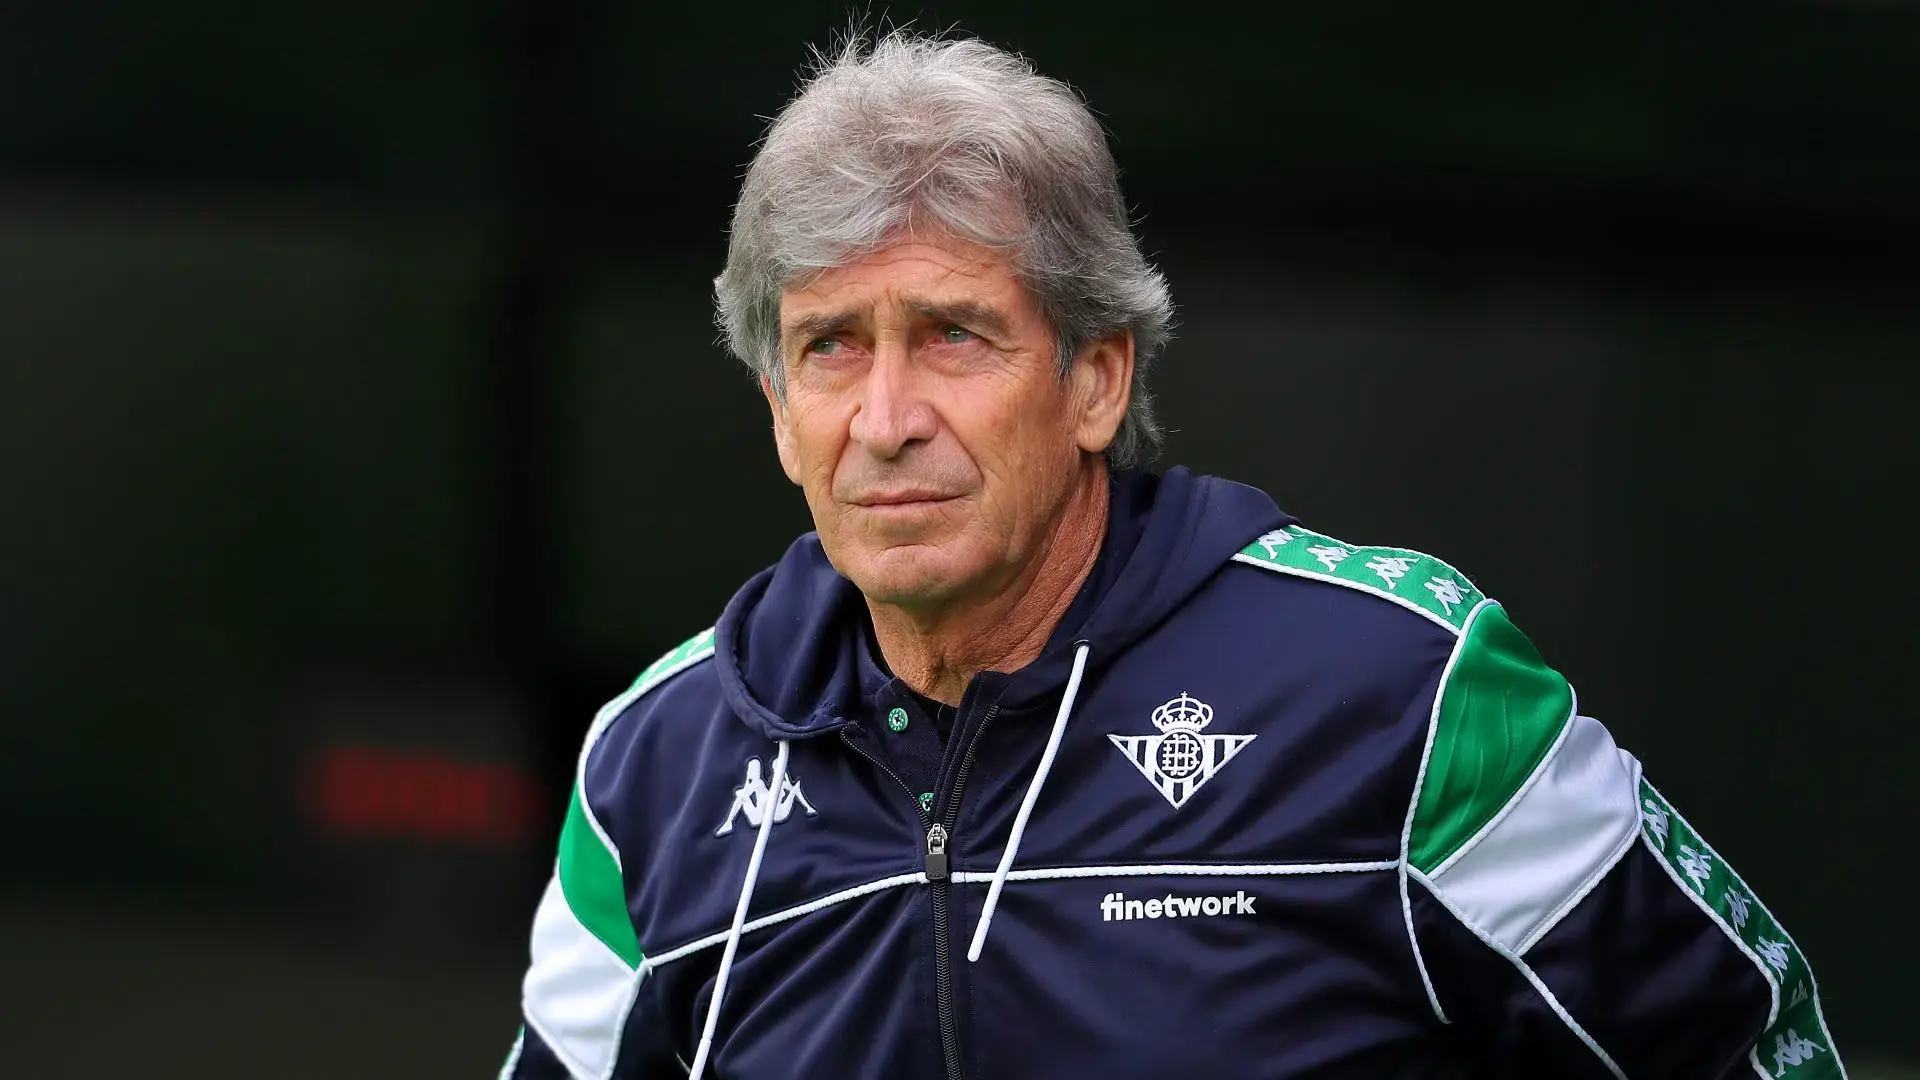 He is the undisputed starter at Pellegrini's Betis: million-dollar offer to play in La Premier
	
